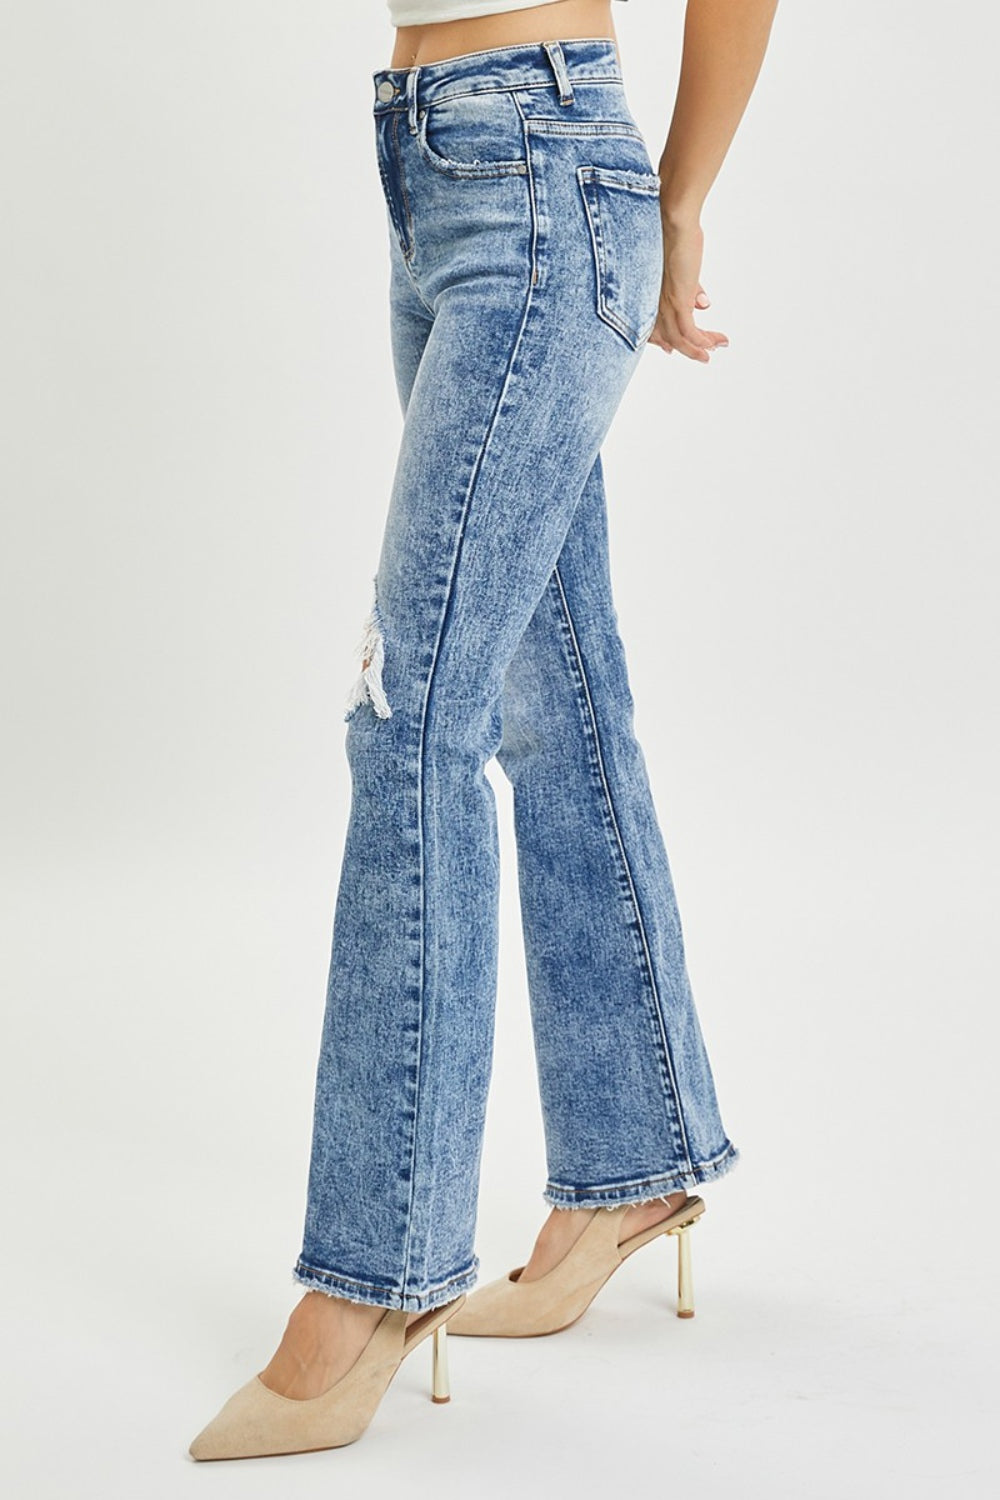 Wilder Side Distressed Flare Jeans - Cheeky Chic Boutique